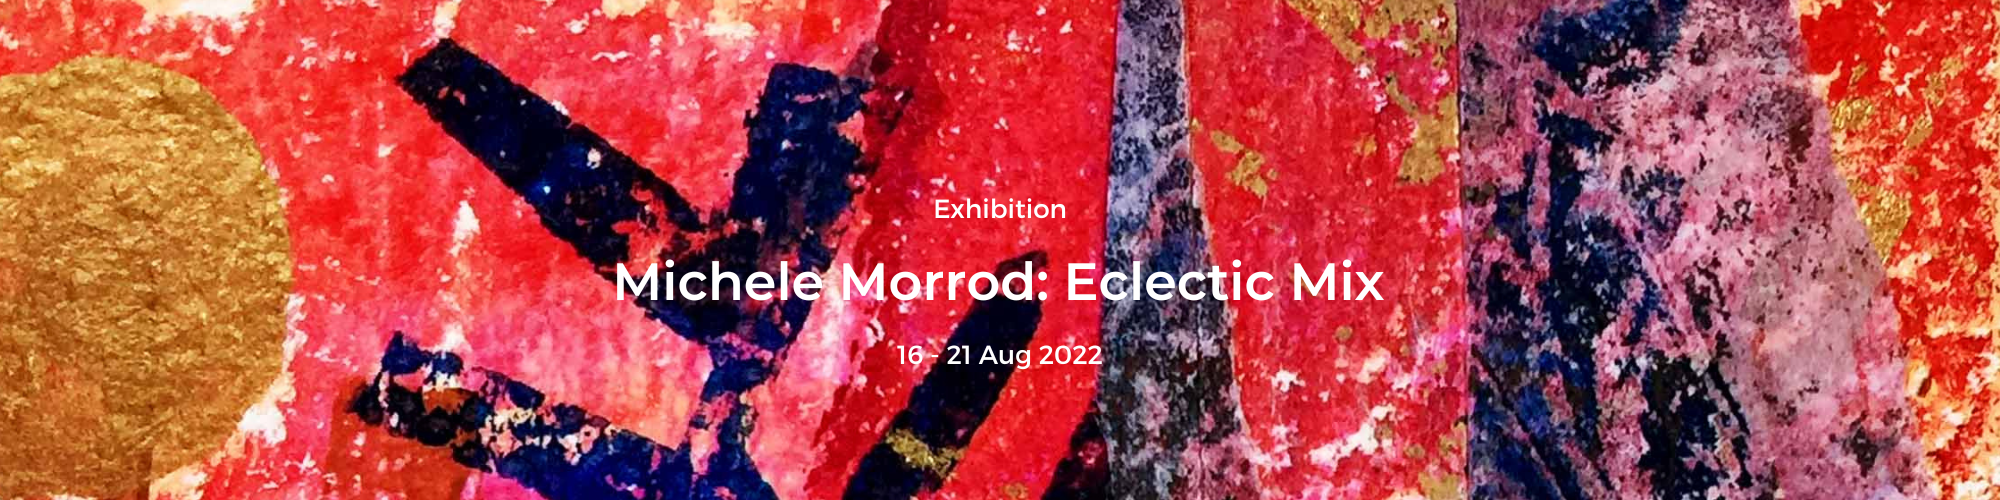 Michele Morrod: Eclectic Mix